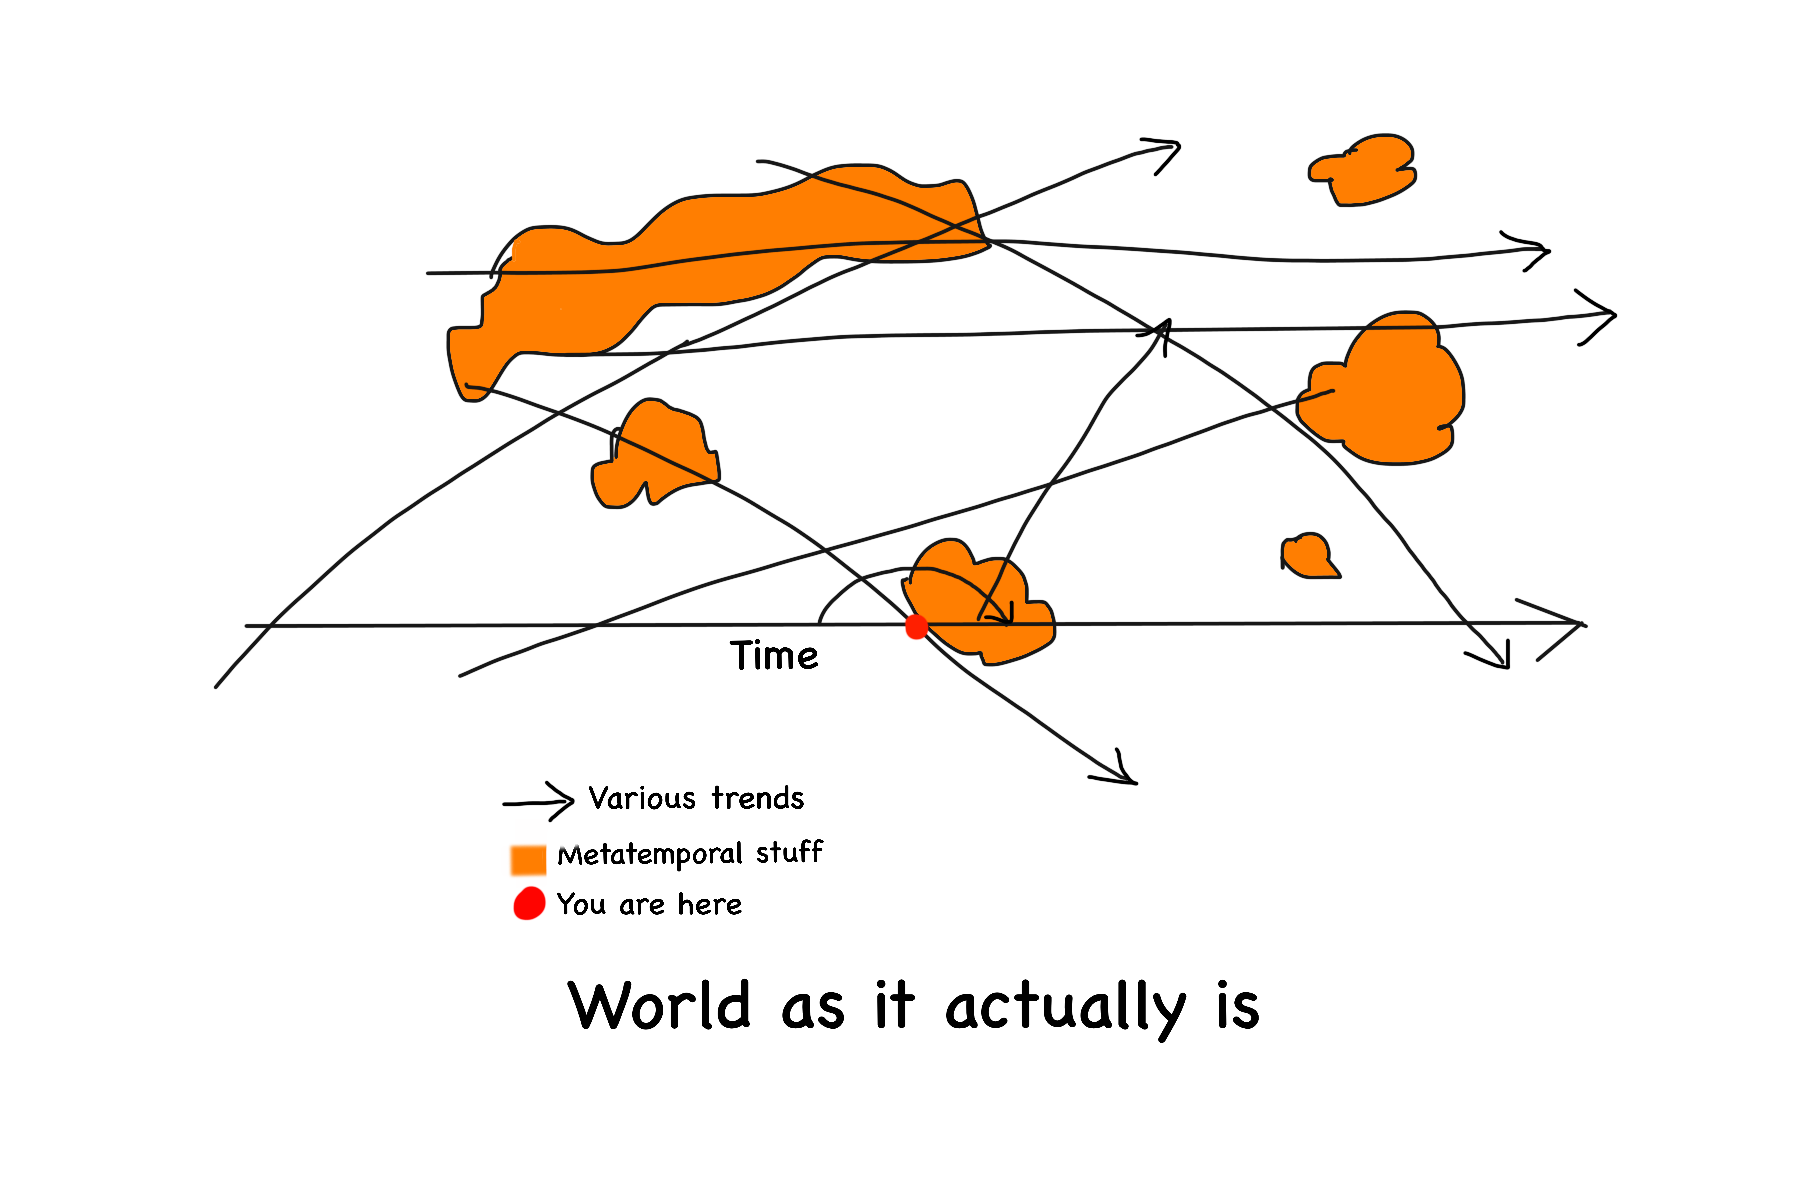 'World as it actually is' with multiple lines and blobs. Slightly chaotic.